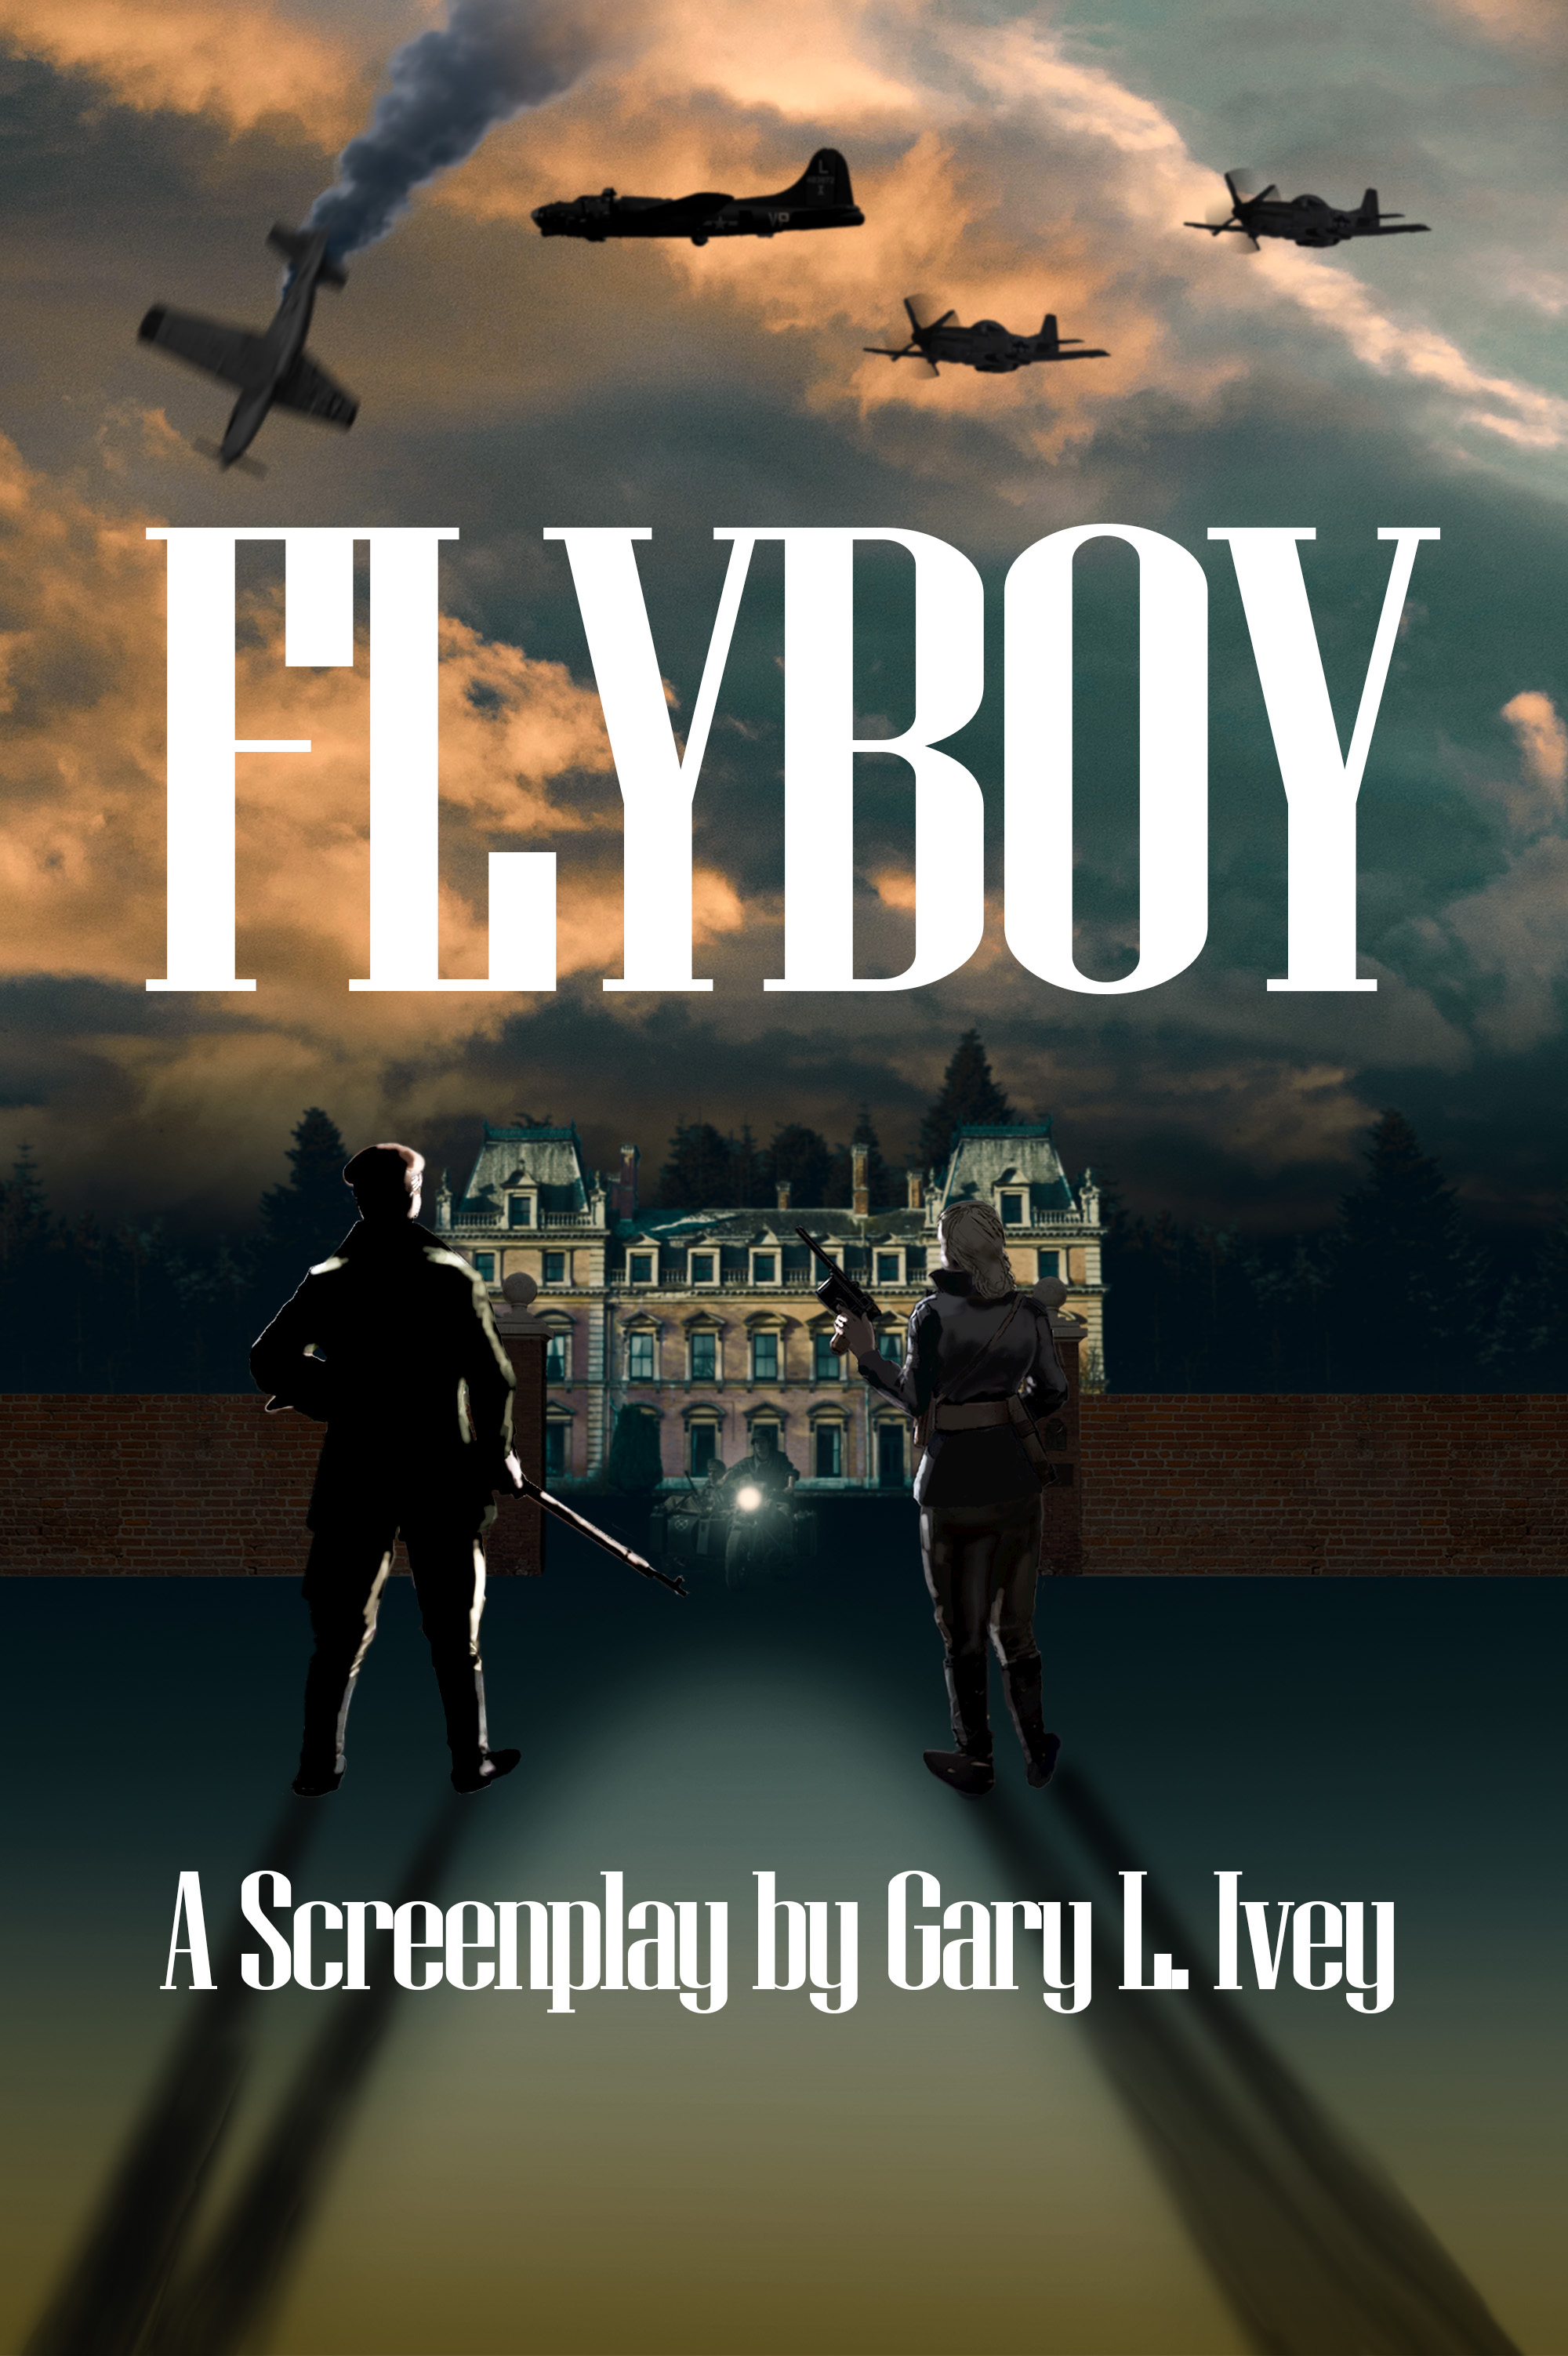 Flyboy Screenplay poster